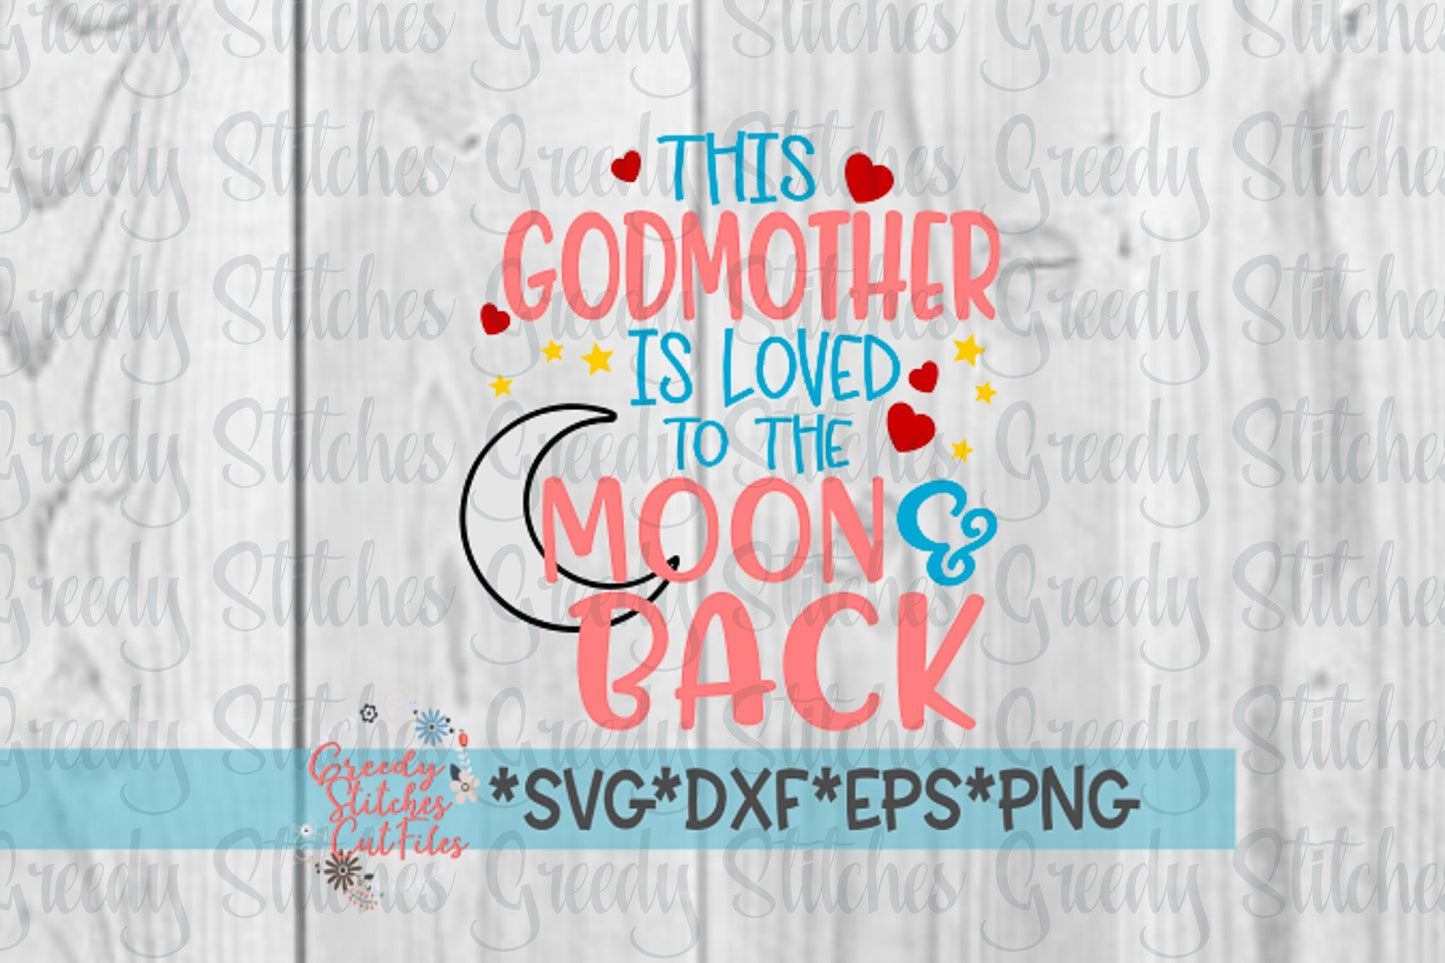 Mother&#39;s Day | This Godmother Is Loved To The Moon & Back svg dxf eps png. Godmother SVG | Godmother Is Loved SVG |Instant Download Cut File